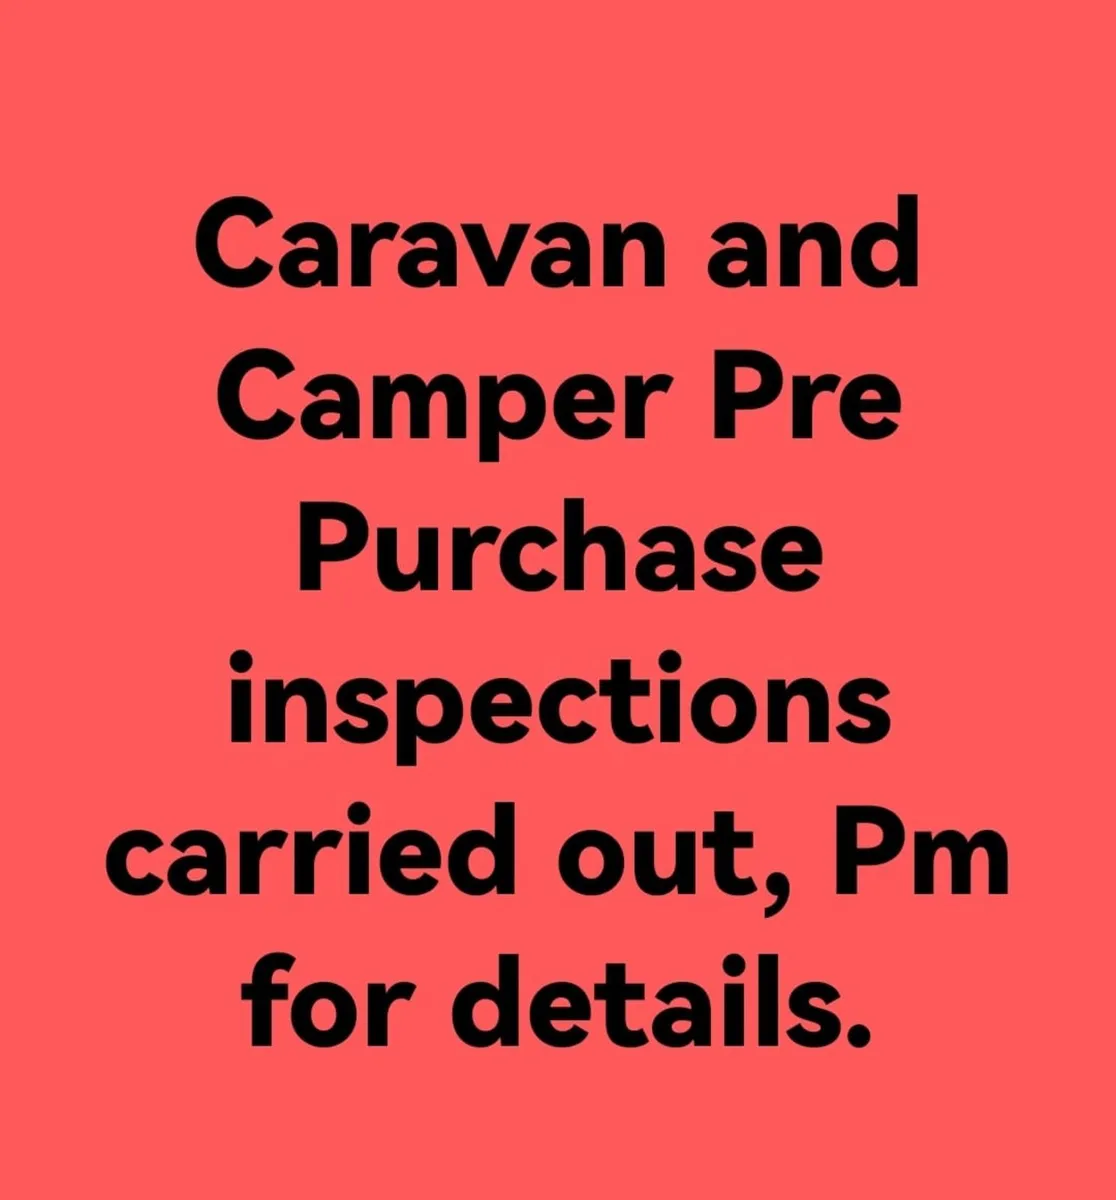 Caravan and Camper Pre Purchase inspections - Image 1